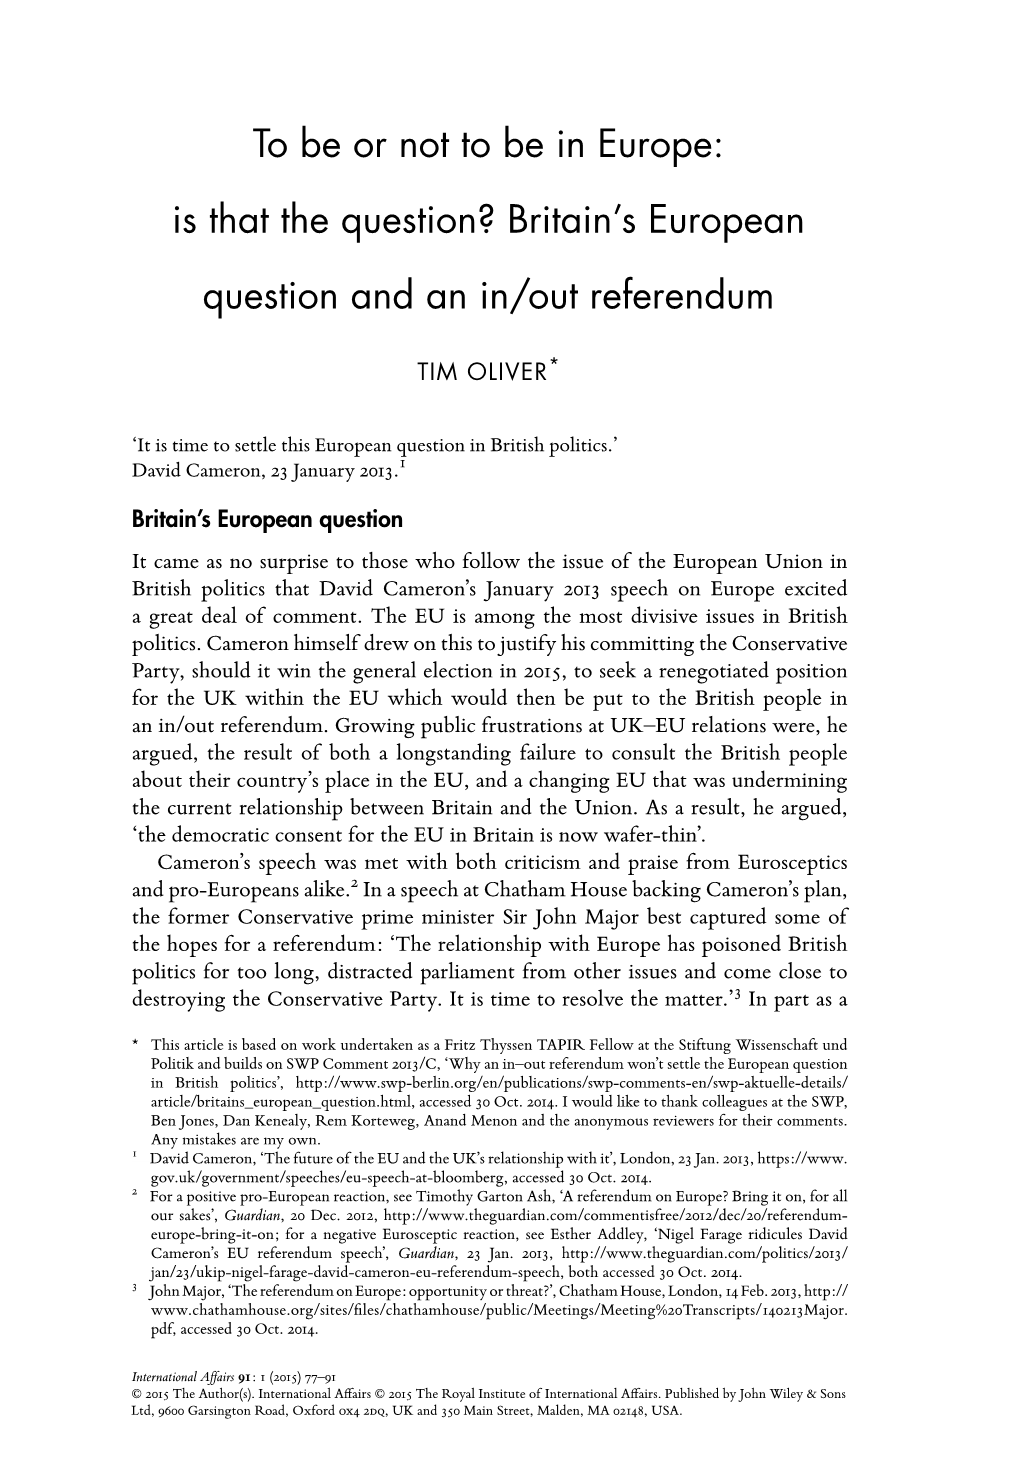 Britain's European Question and an In/Out Referendum